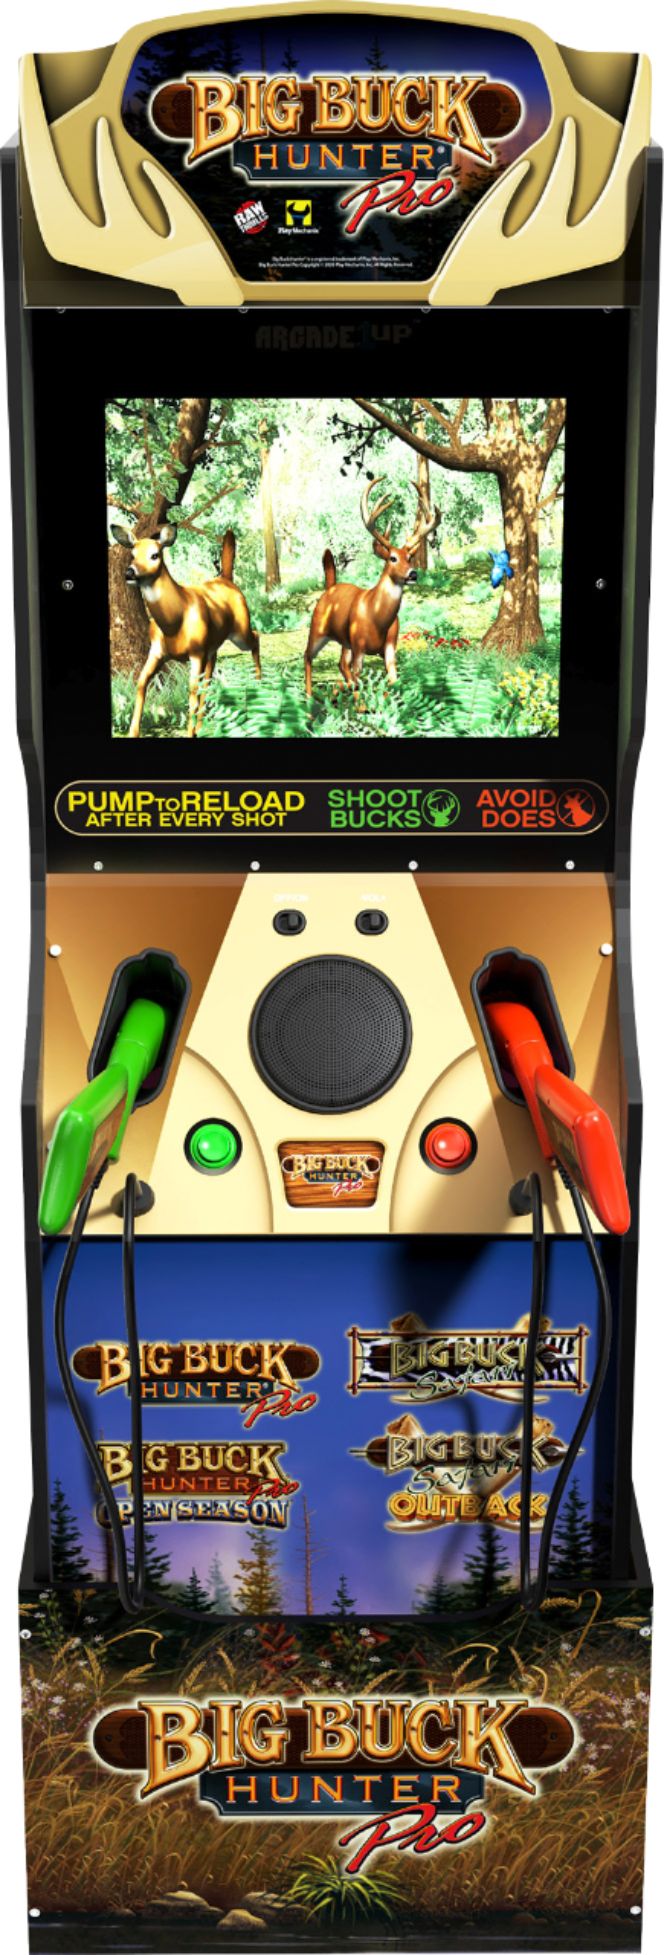 Arcade1up Big Buck Hunter Pro Arcade With Riser And Wall Sign Multi Best Buy